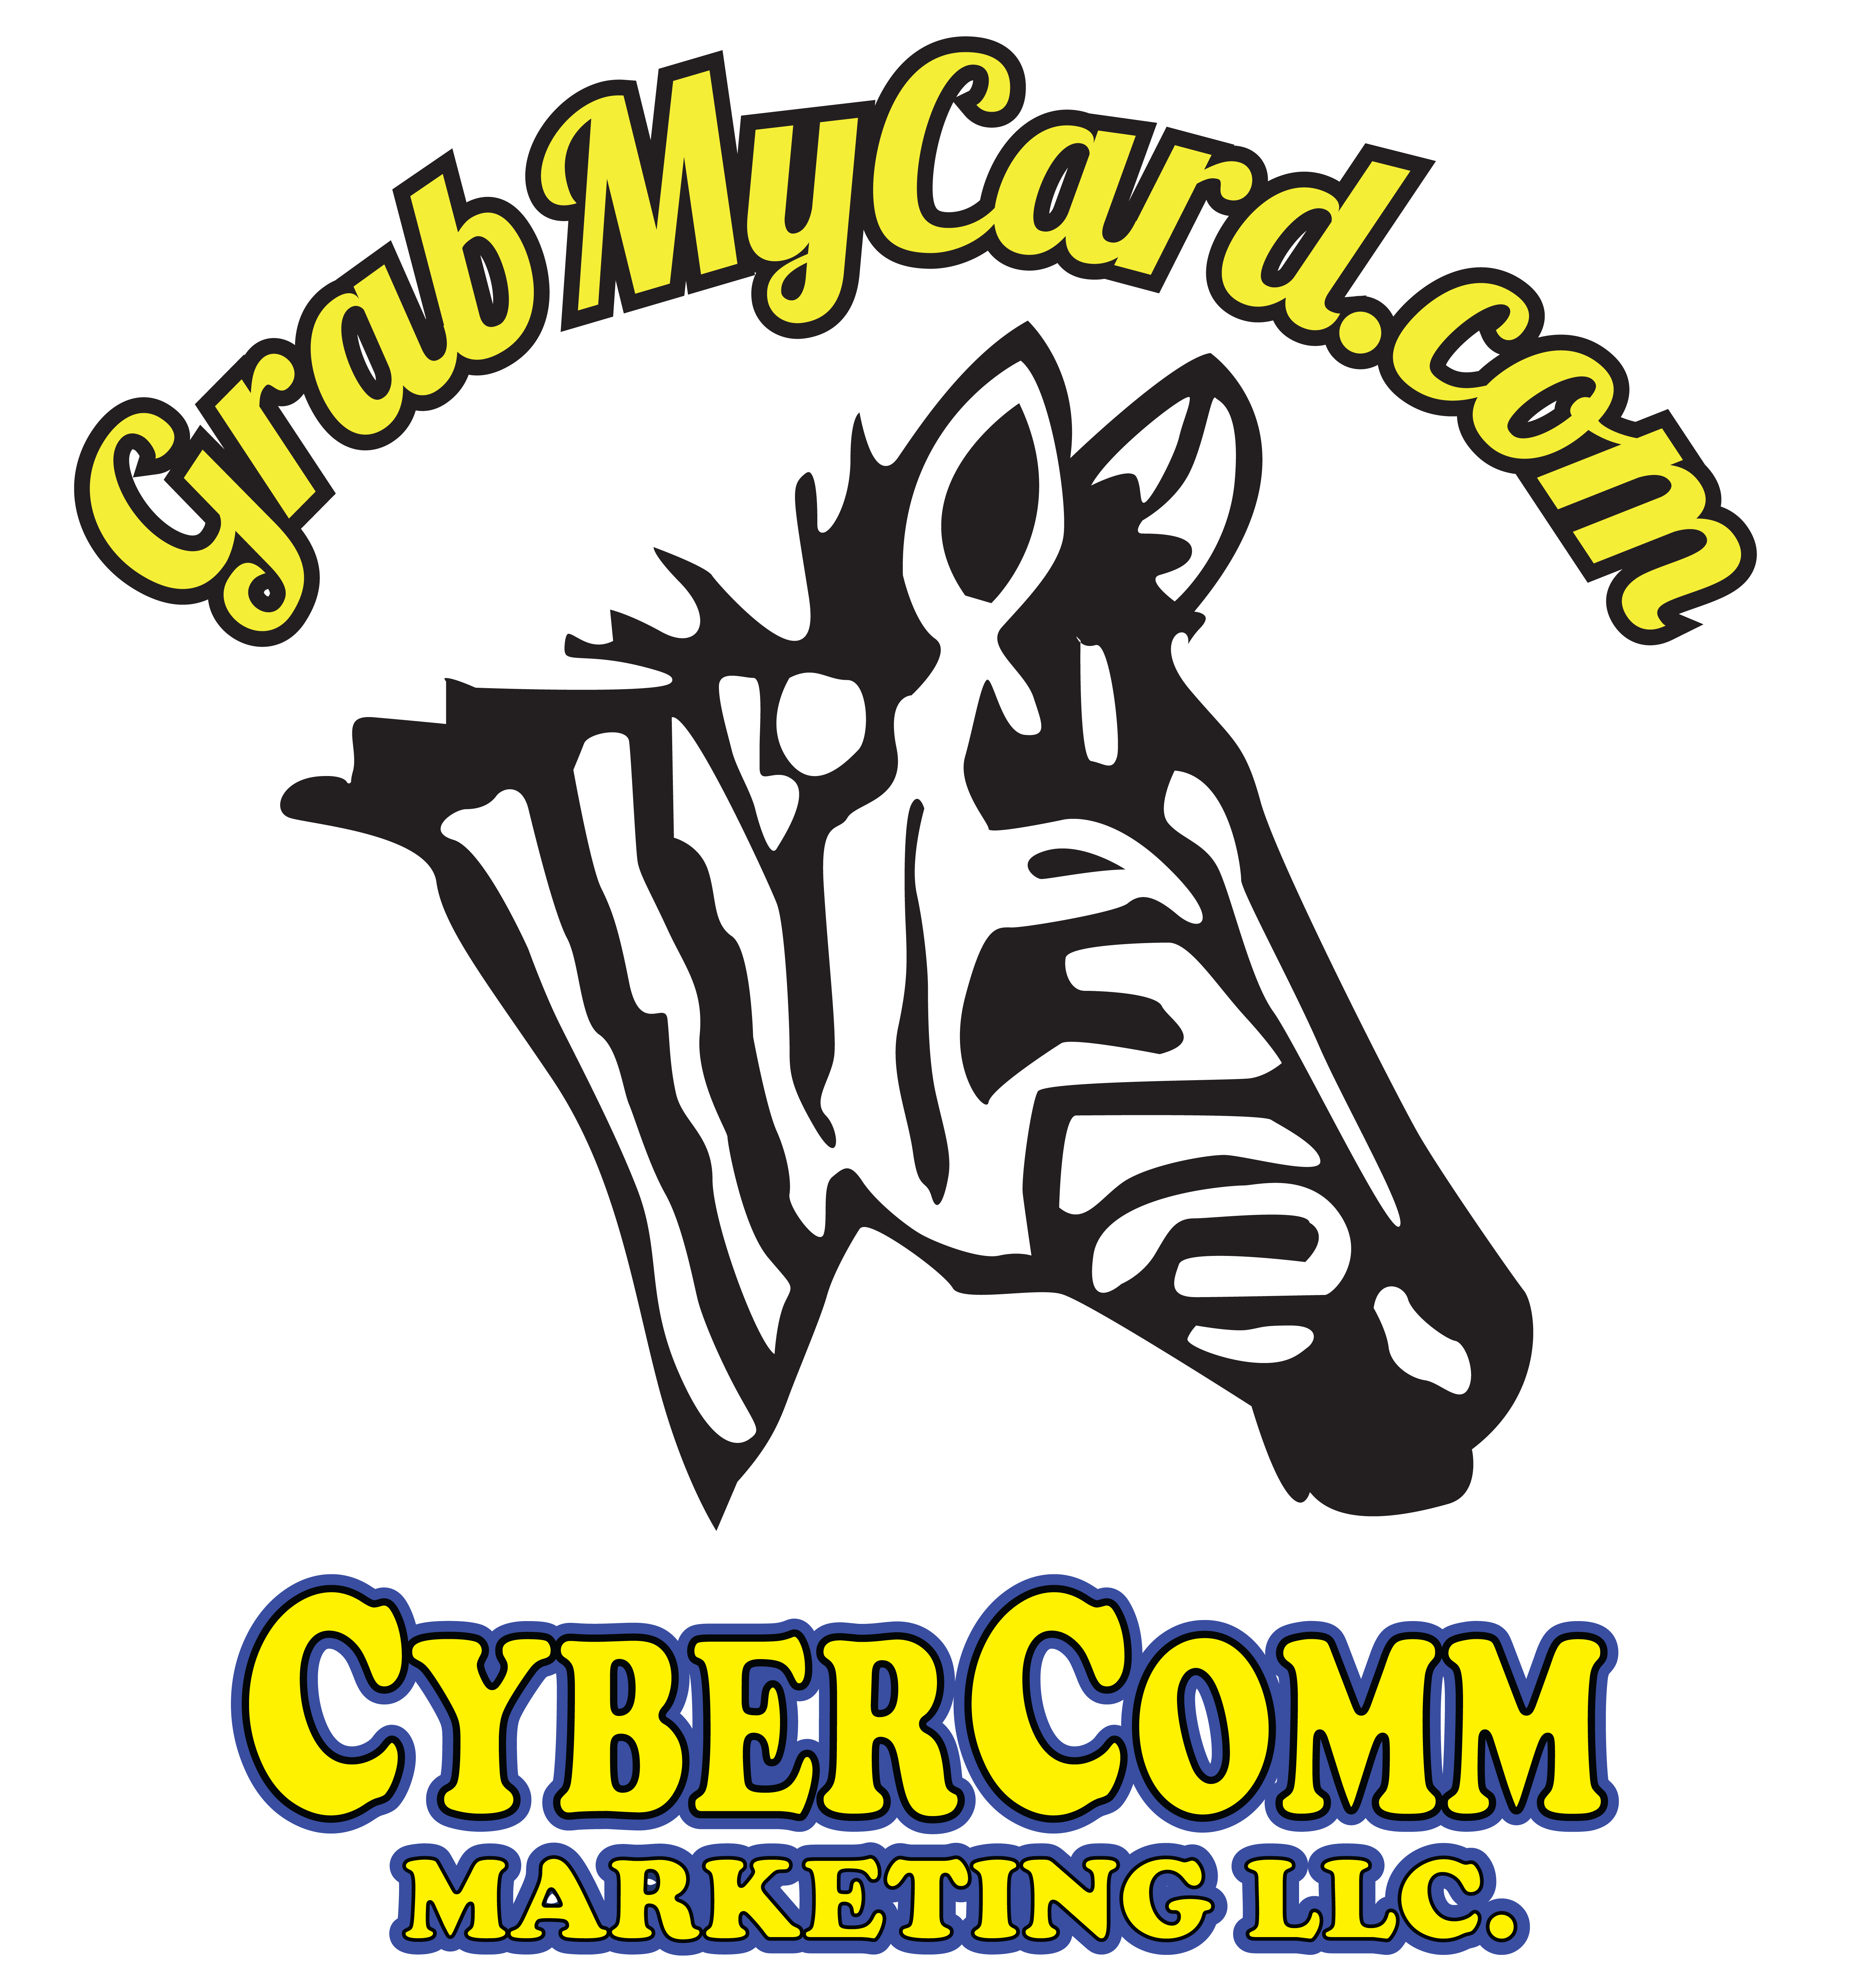 Fence contractors & fence contracting companies that have the digital business card from GrabMyCard.com & CyberComm Marketing, LLC